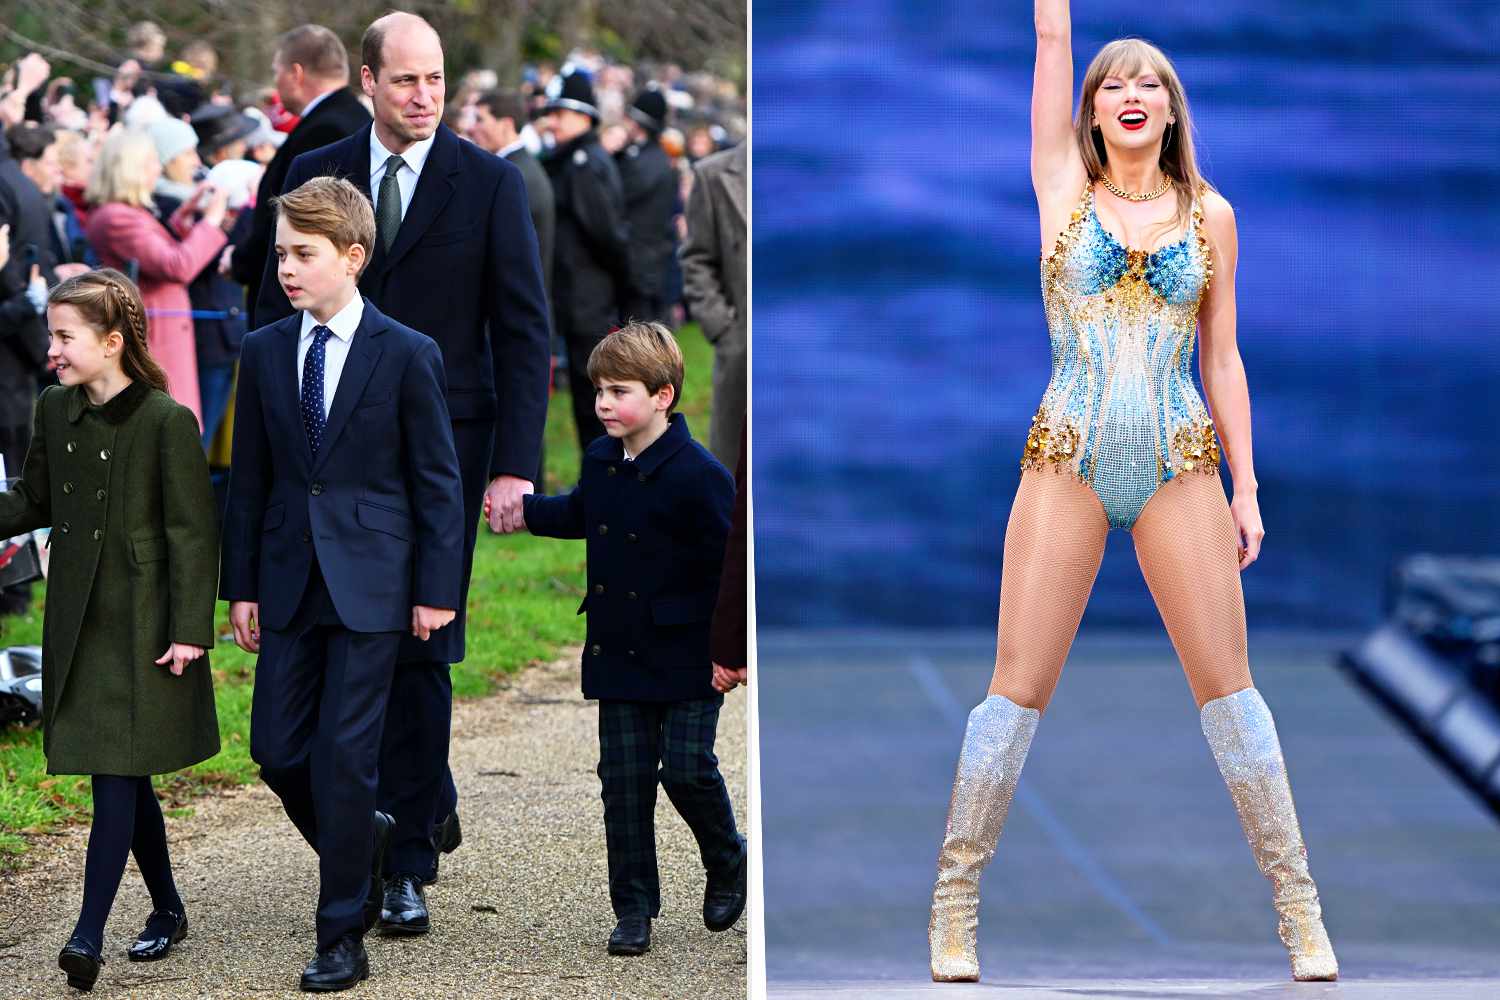 Prince William Celebrates Birthday with George and Charlotte at Taylor Swift's London Concert